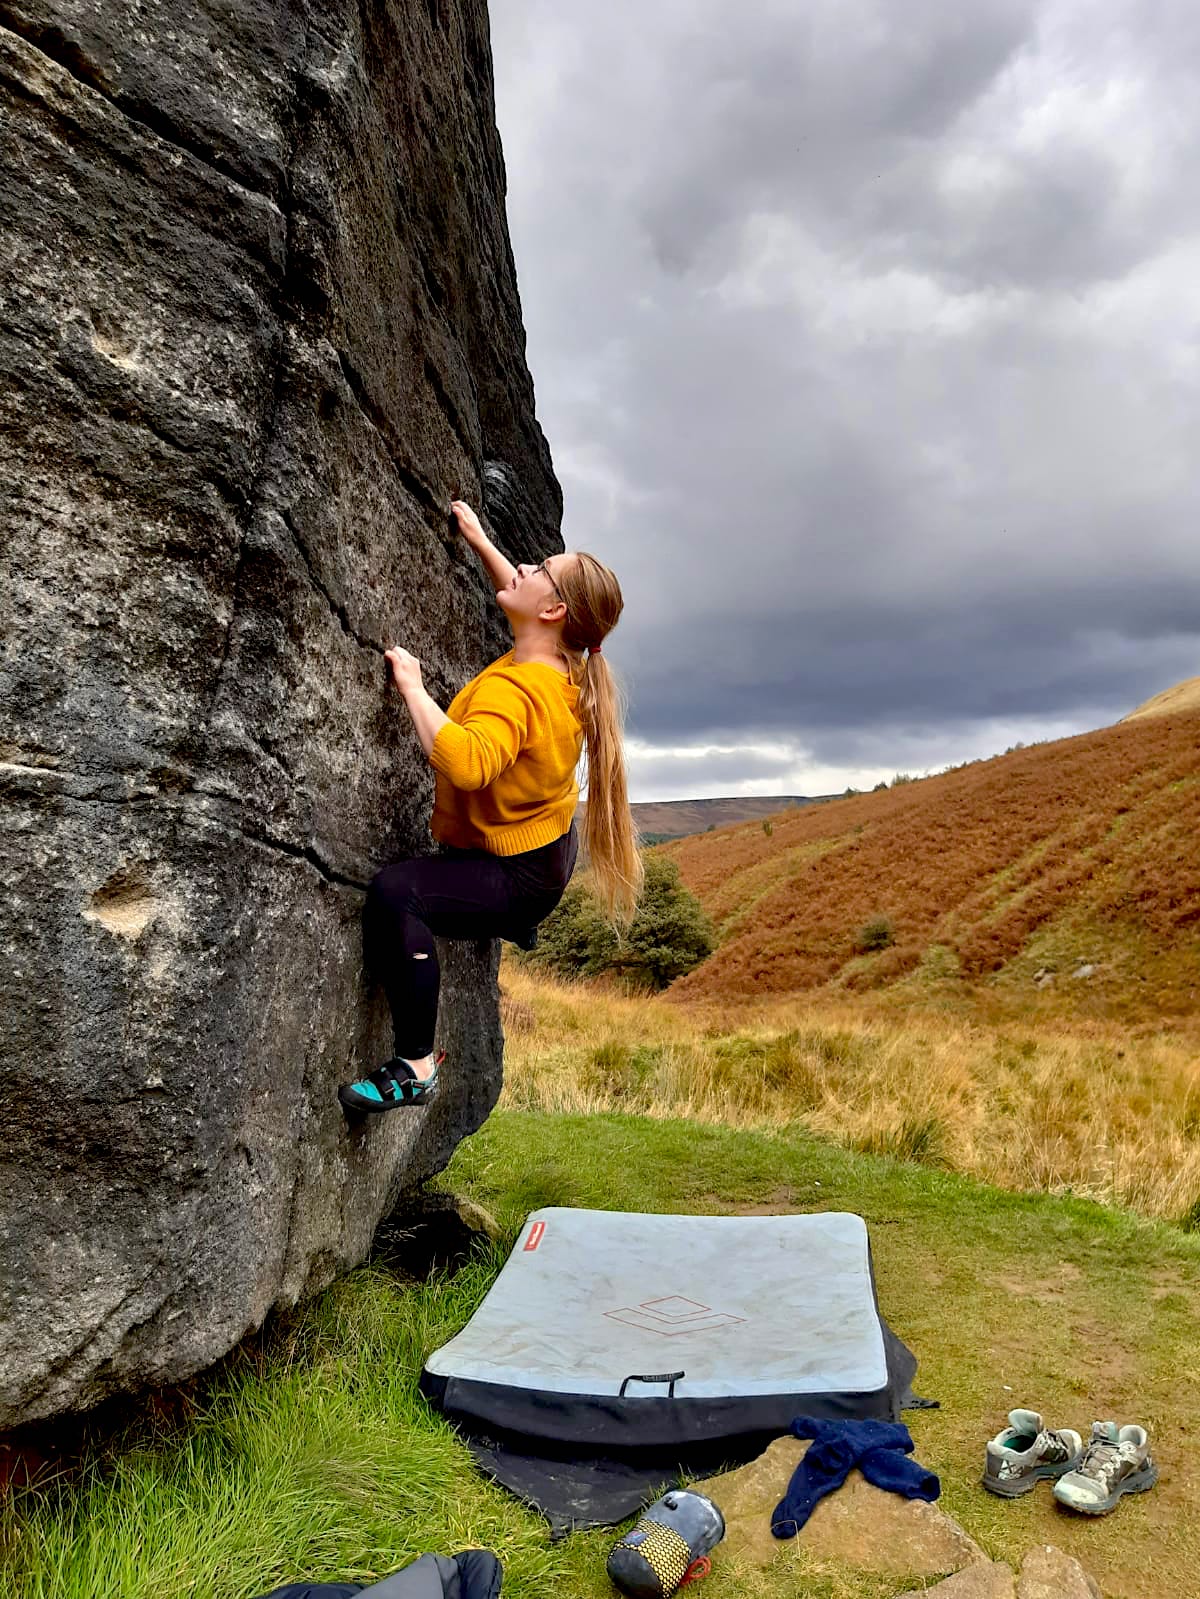 Bouldering at Wimberry Rocks